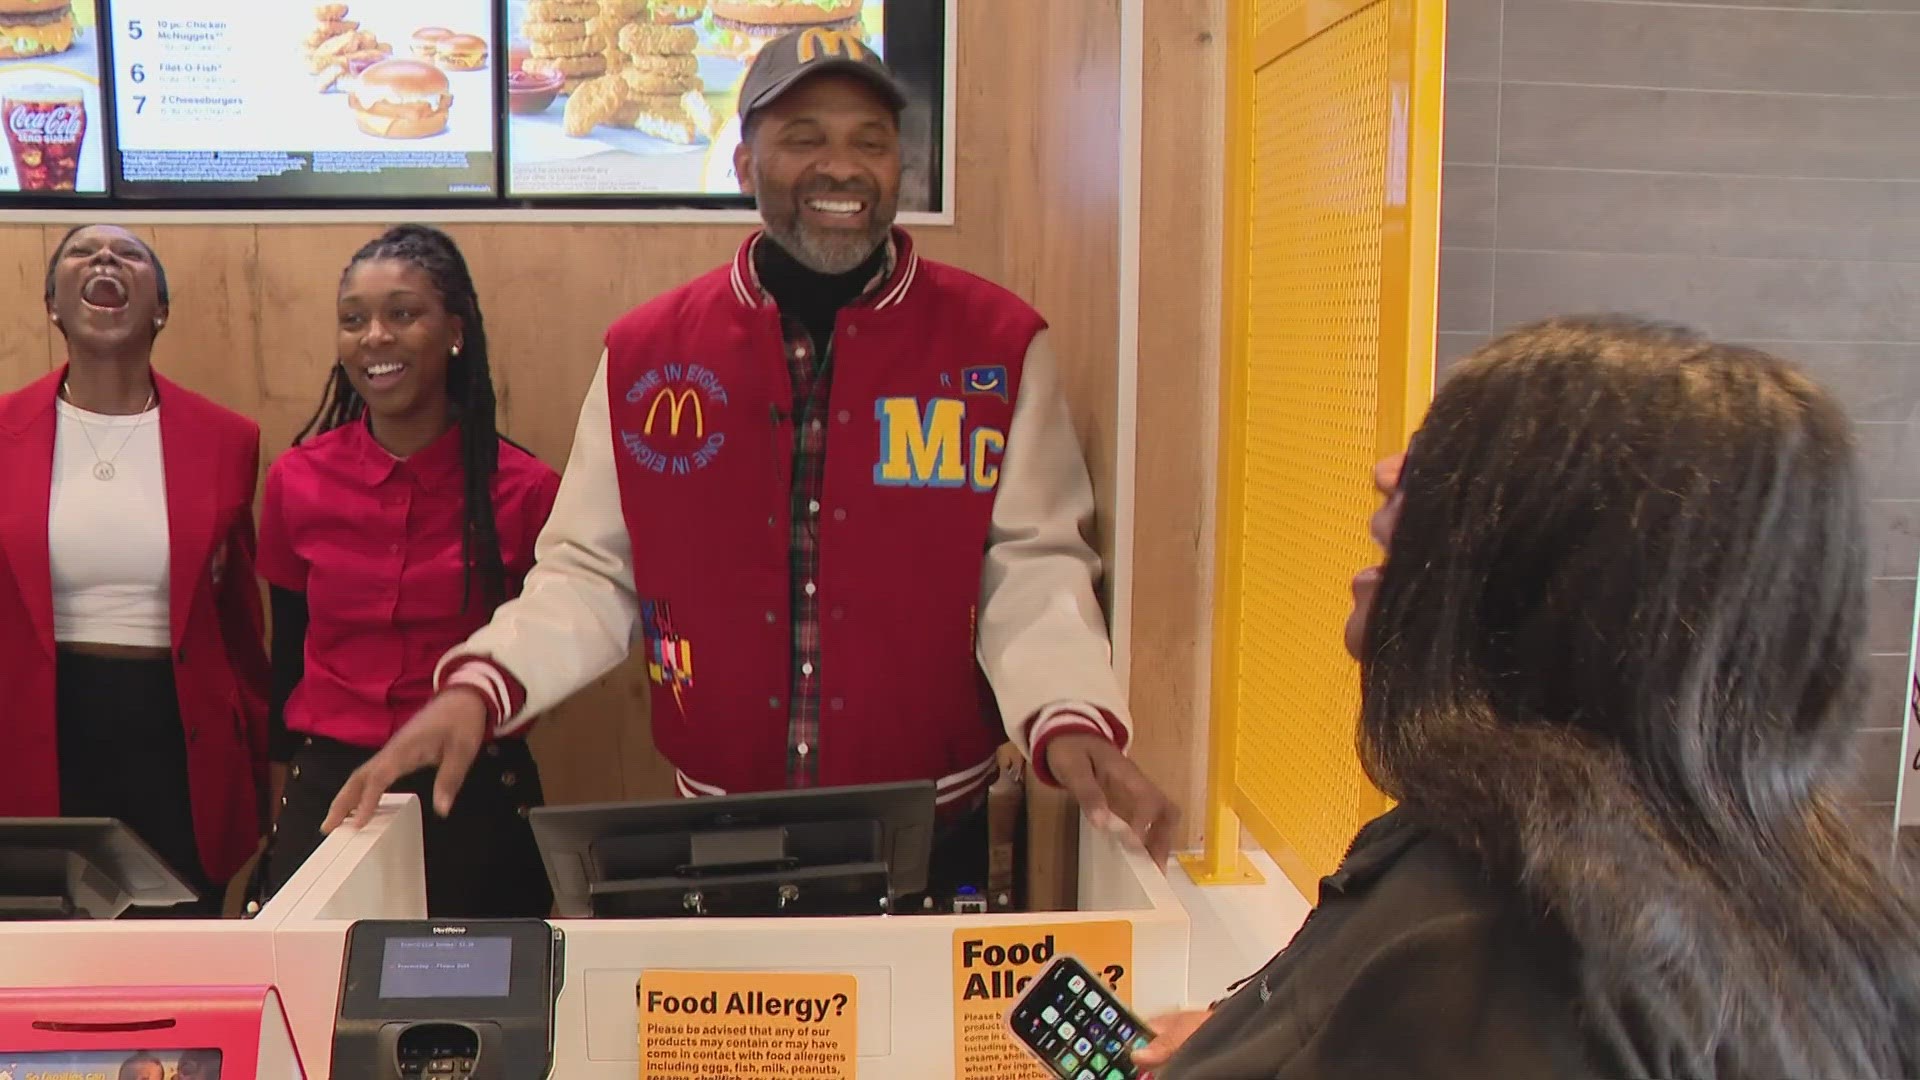 Mike Epps was presented with a 1 in 8 alumni McDonalds jacket, which represents one in 8 Americans who've worked for the restaurant chain.